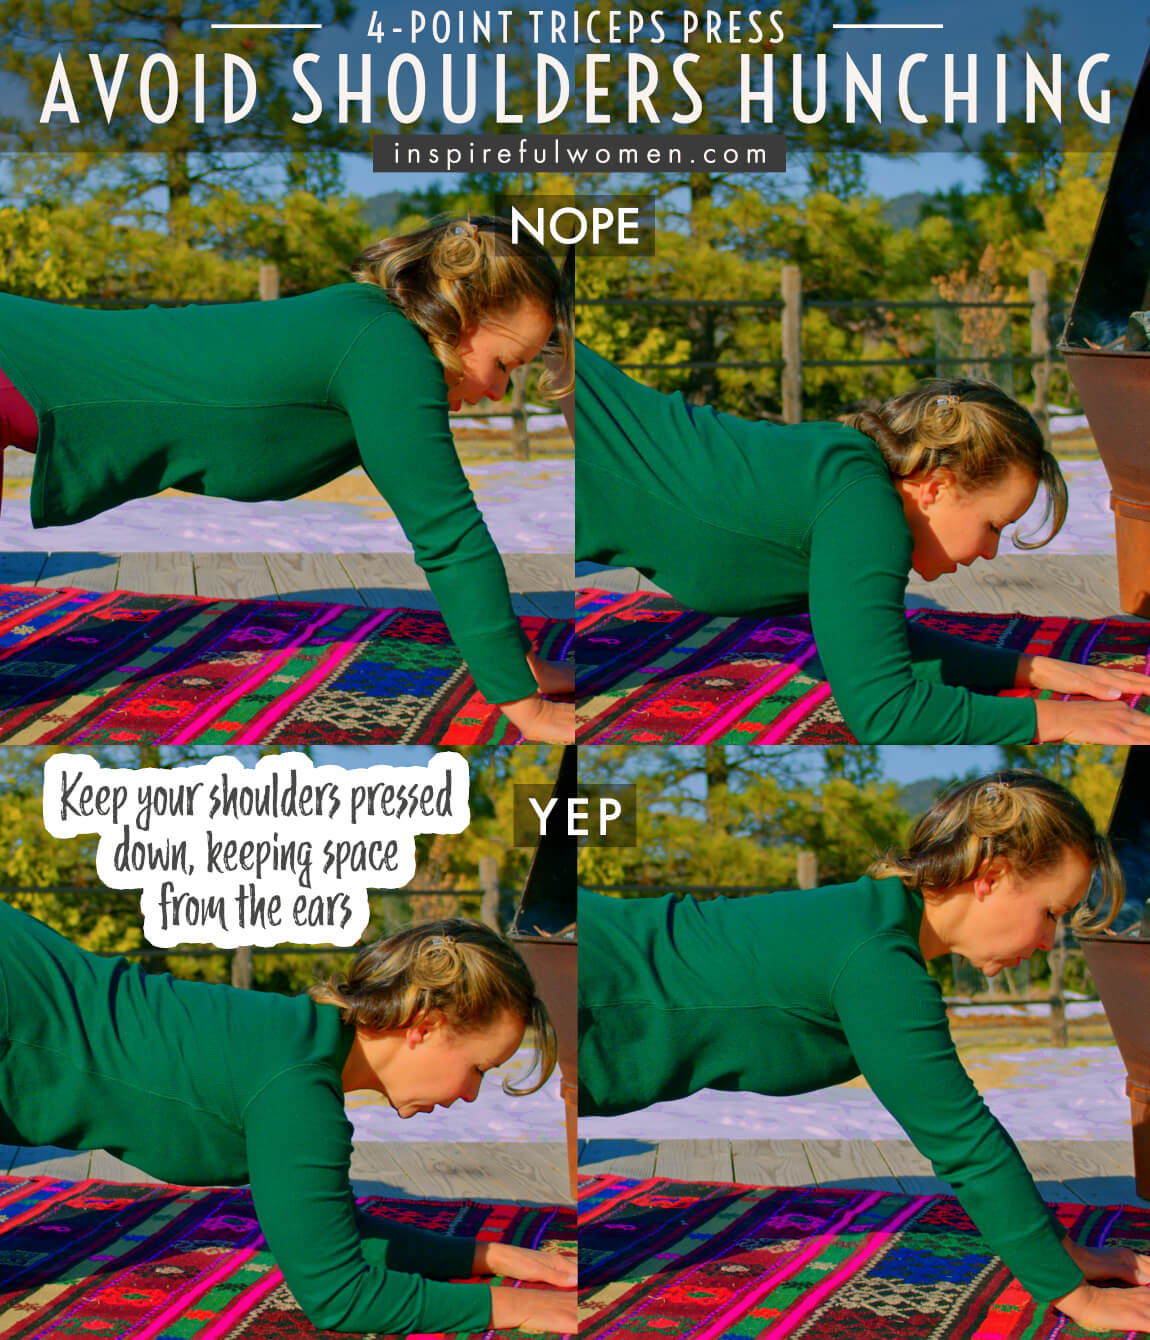 avoid-shoulders-hunching-up-to-ears-4-point-triceps-press-extension-arm-exercise-common-mistakes